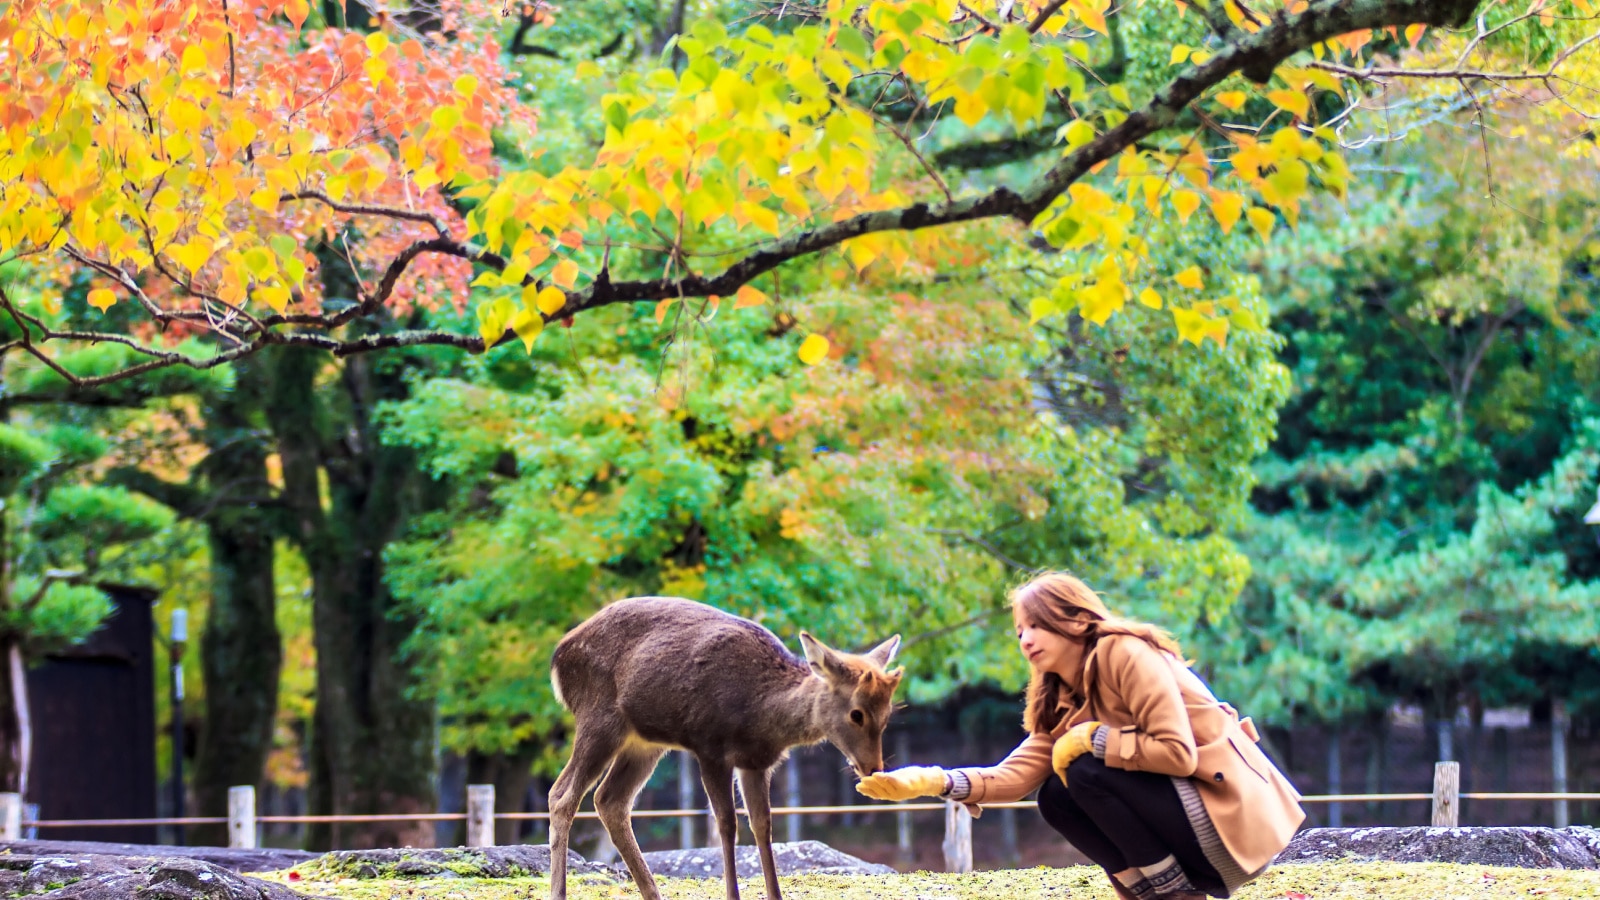 NARA, JAPAN - Nov 21: Visitors feed wild deer on April 21, 2013 in Nara, Japan. Nara is a major tourism destination in Japan - former capita city and currently UNESCO World Heritage Site.